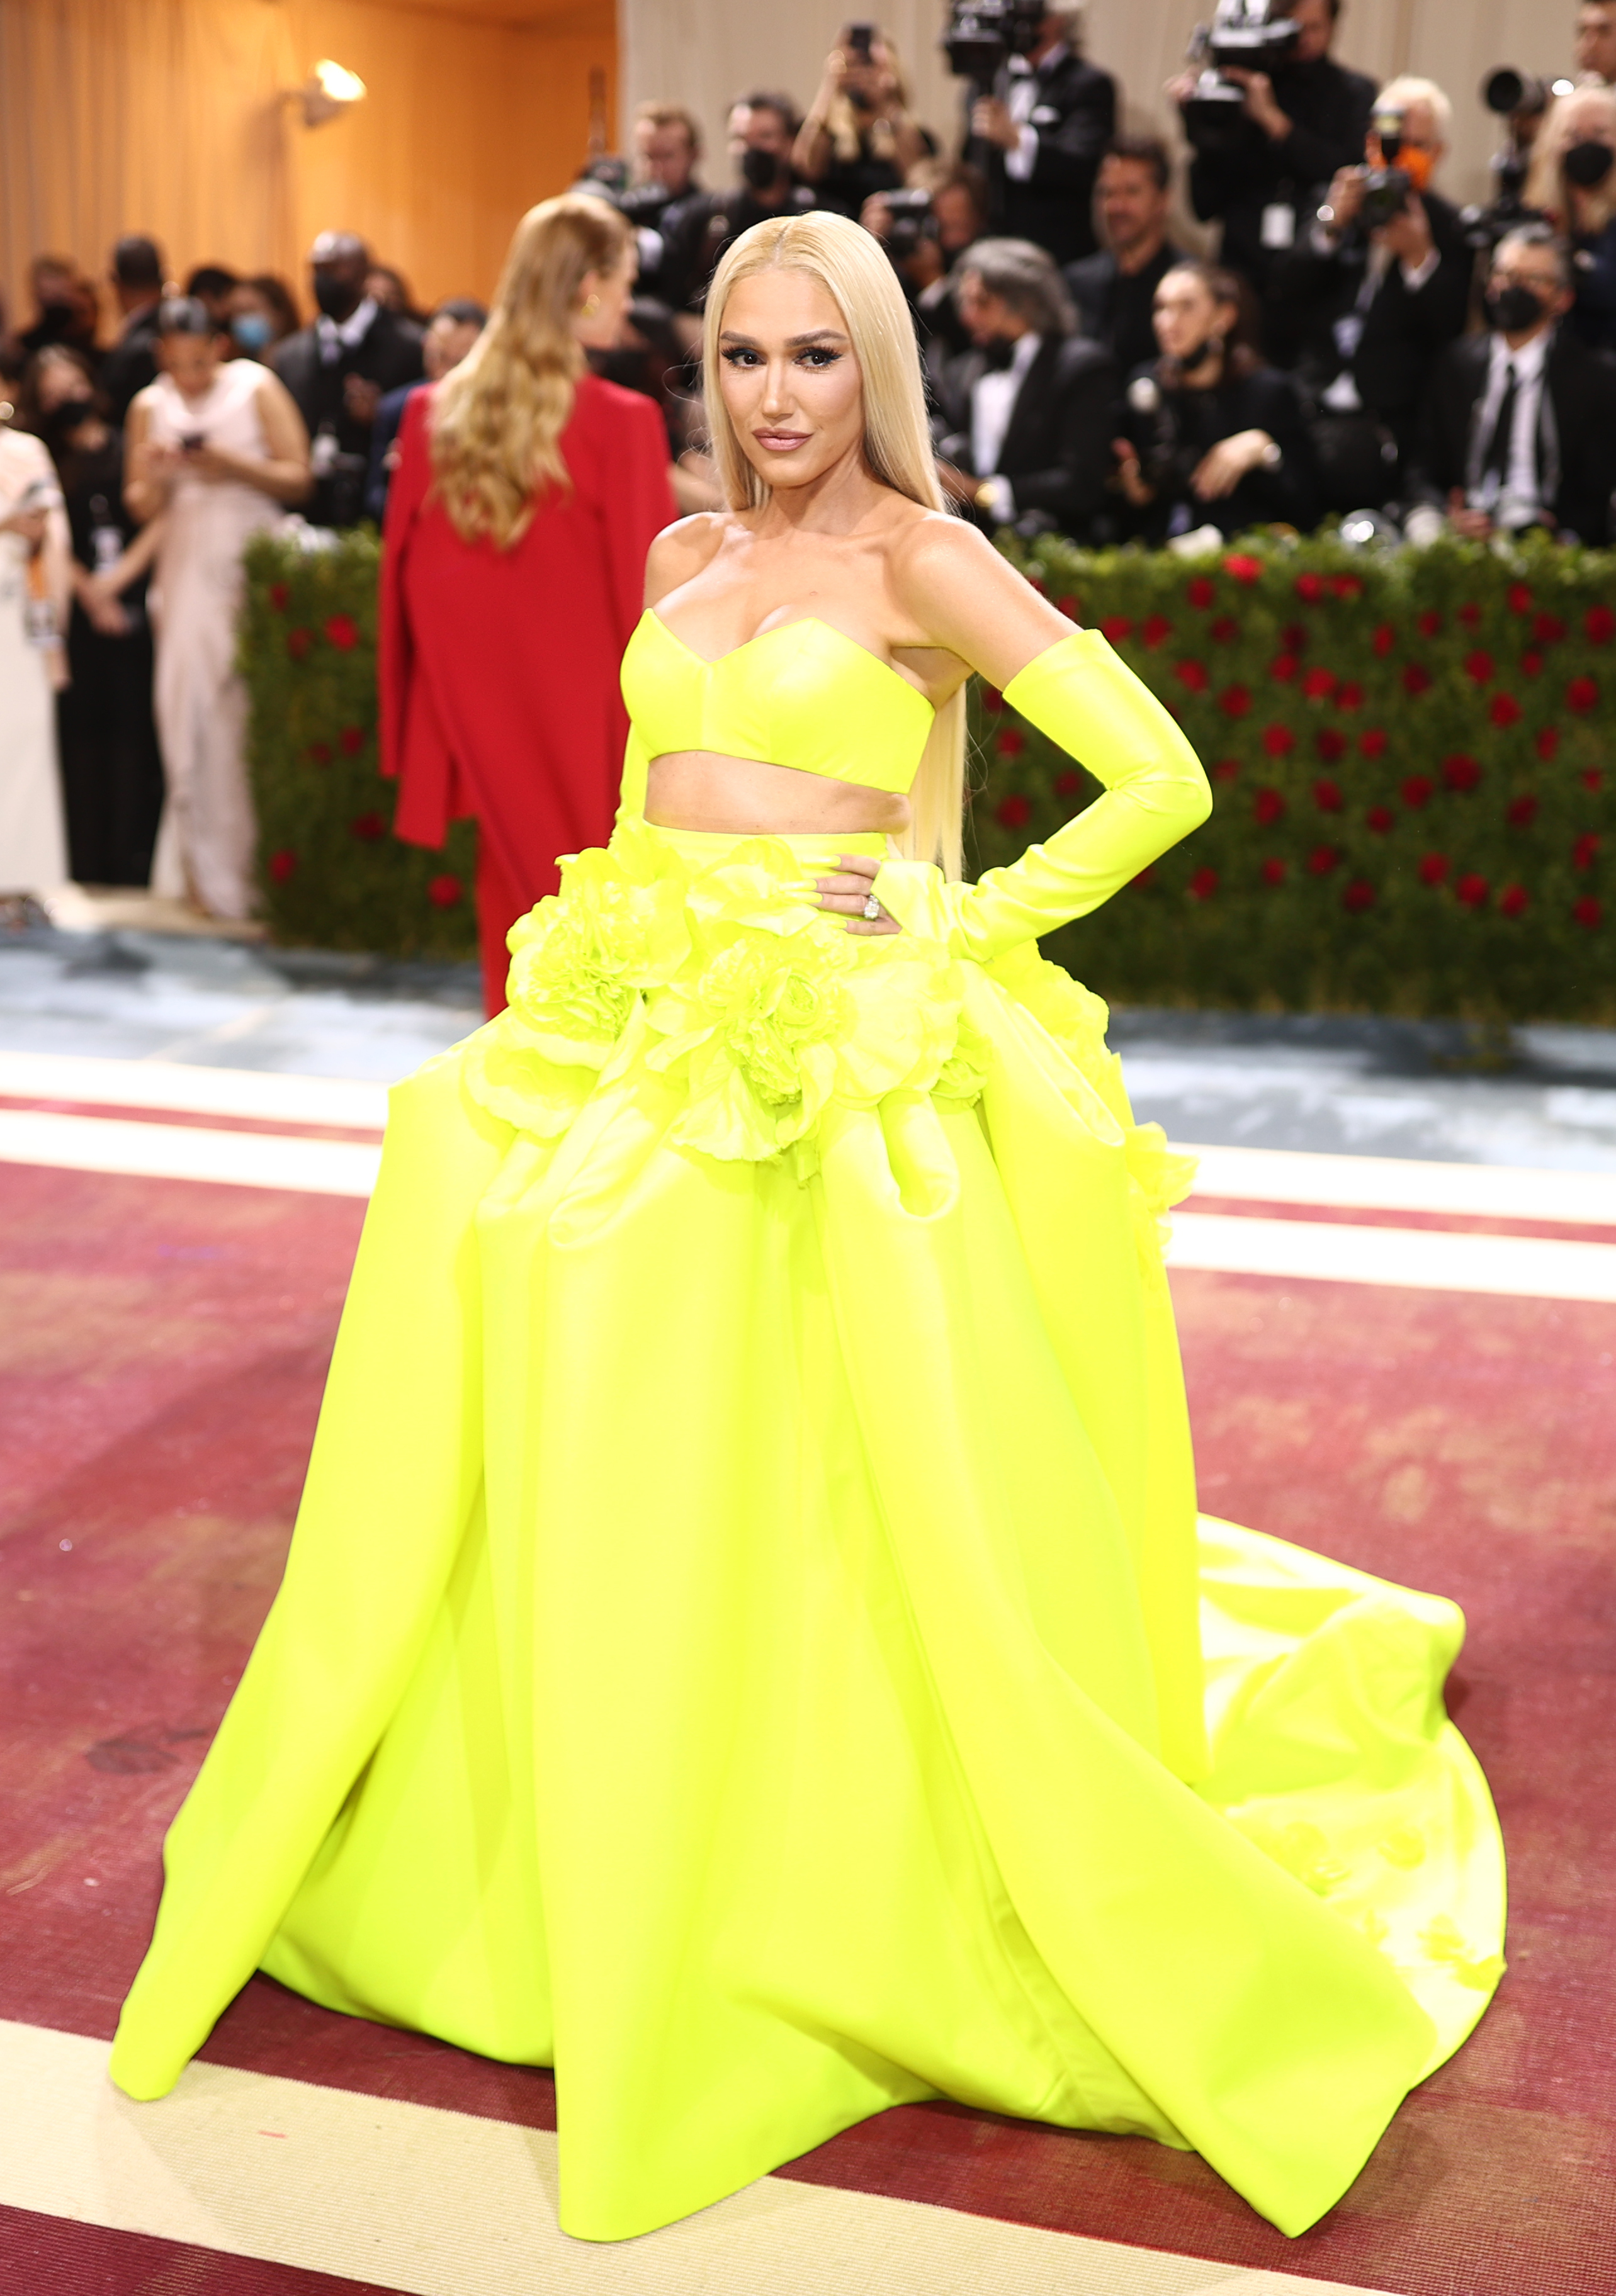 Woman in striking yellow gown with midriff cutout, long sleeves, and floral accents posing on event carpet